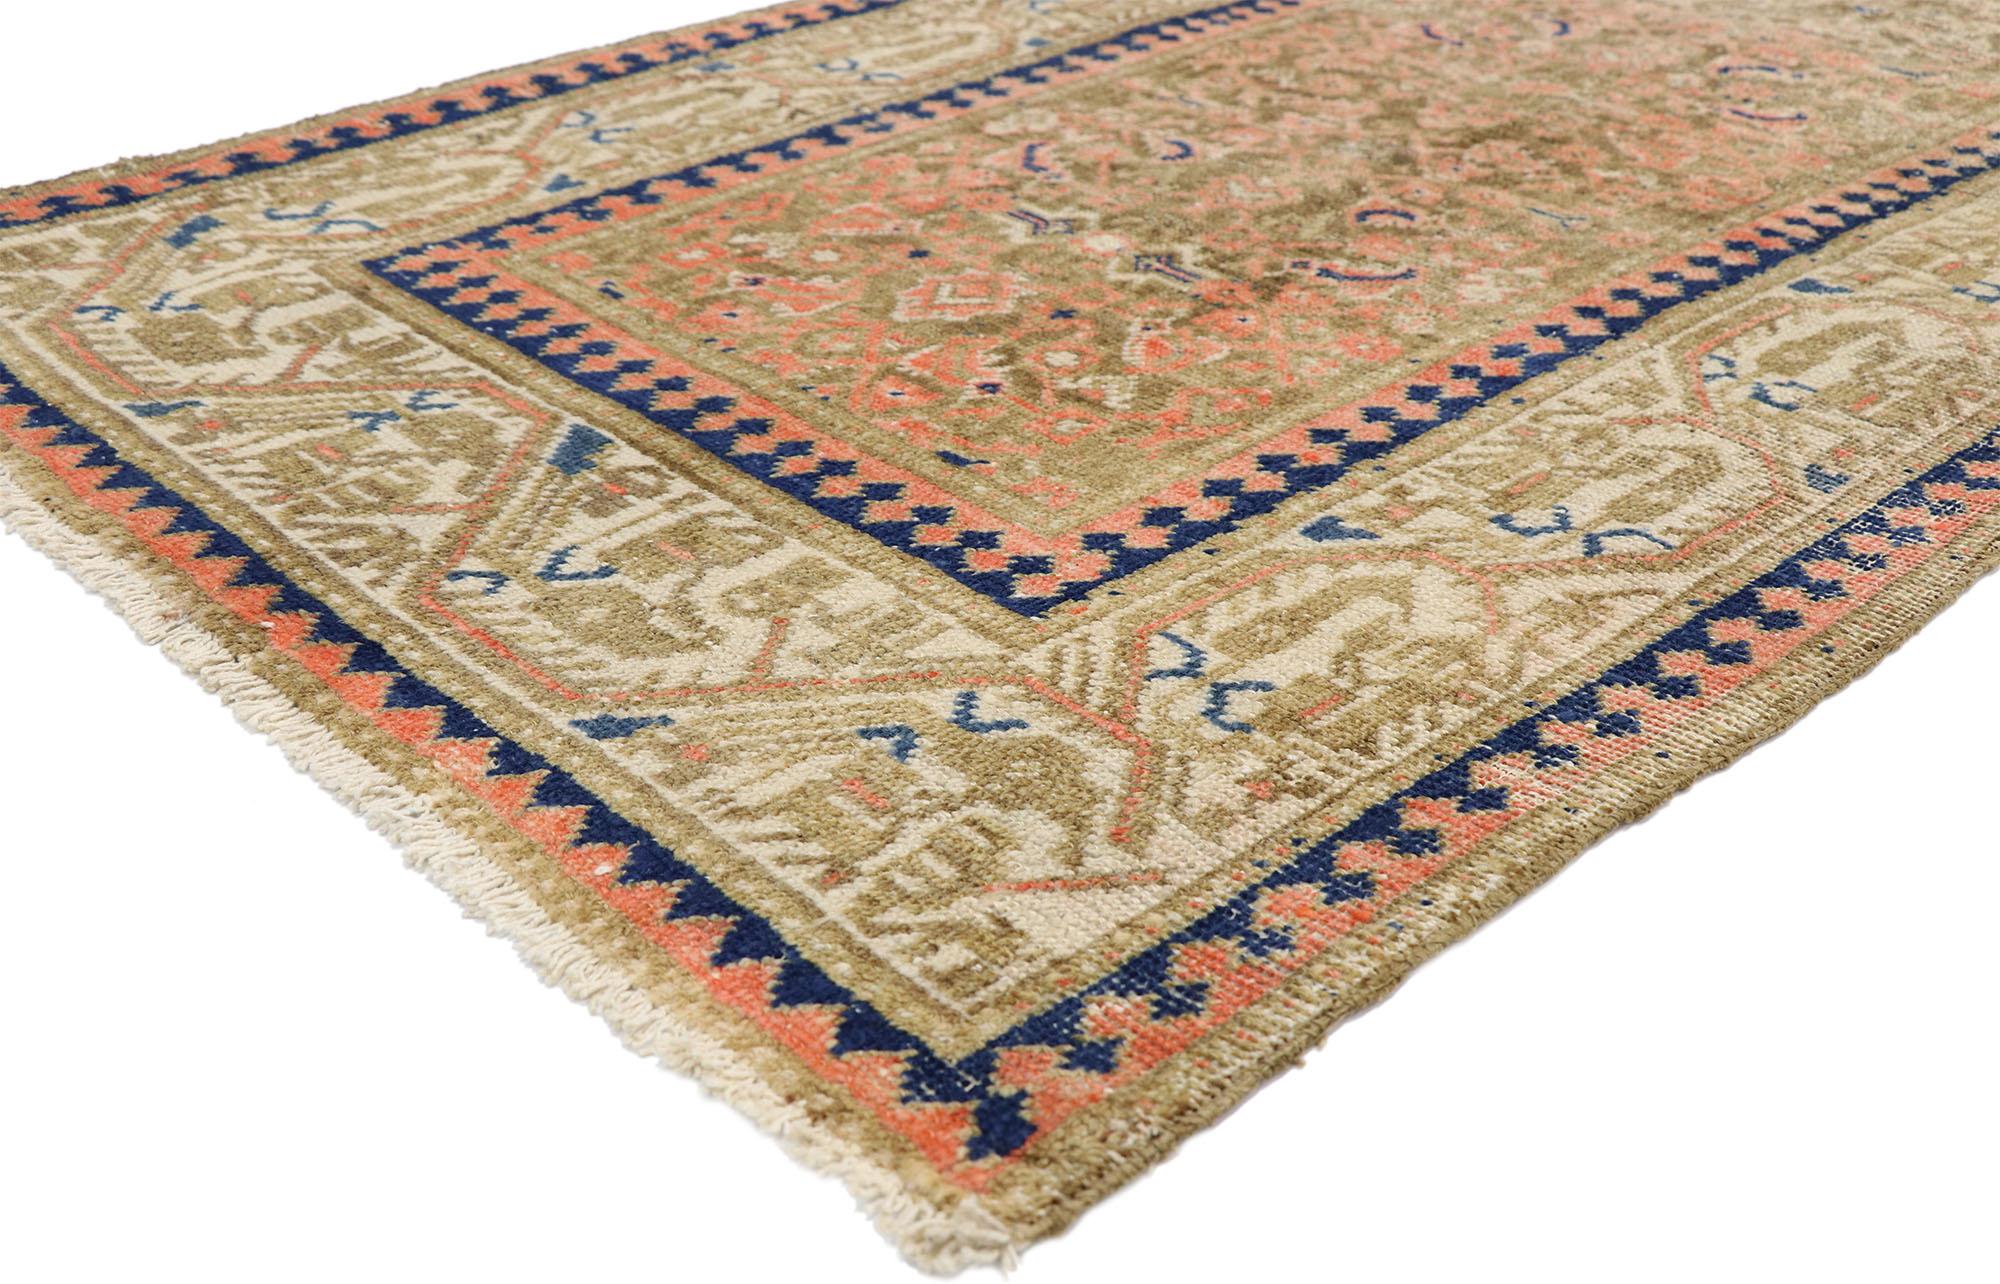 52548 Distressed Vintage Turkish Sivas Runner with Rustic Pacific Northwest Style 03'06 x 13'01. This hand knotted wool distressed vintage Turkish Sivas runner features an all-over Herati pattern spread across an abrashed field. The classic Herati